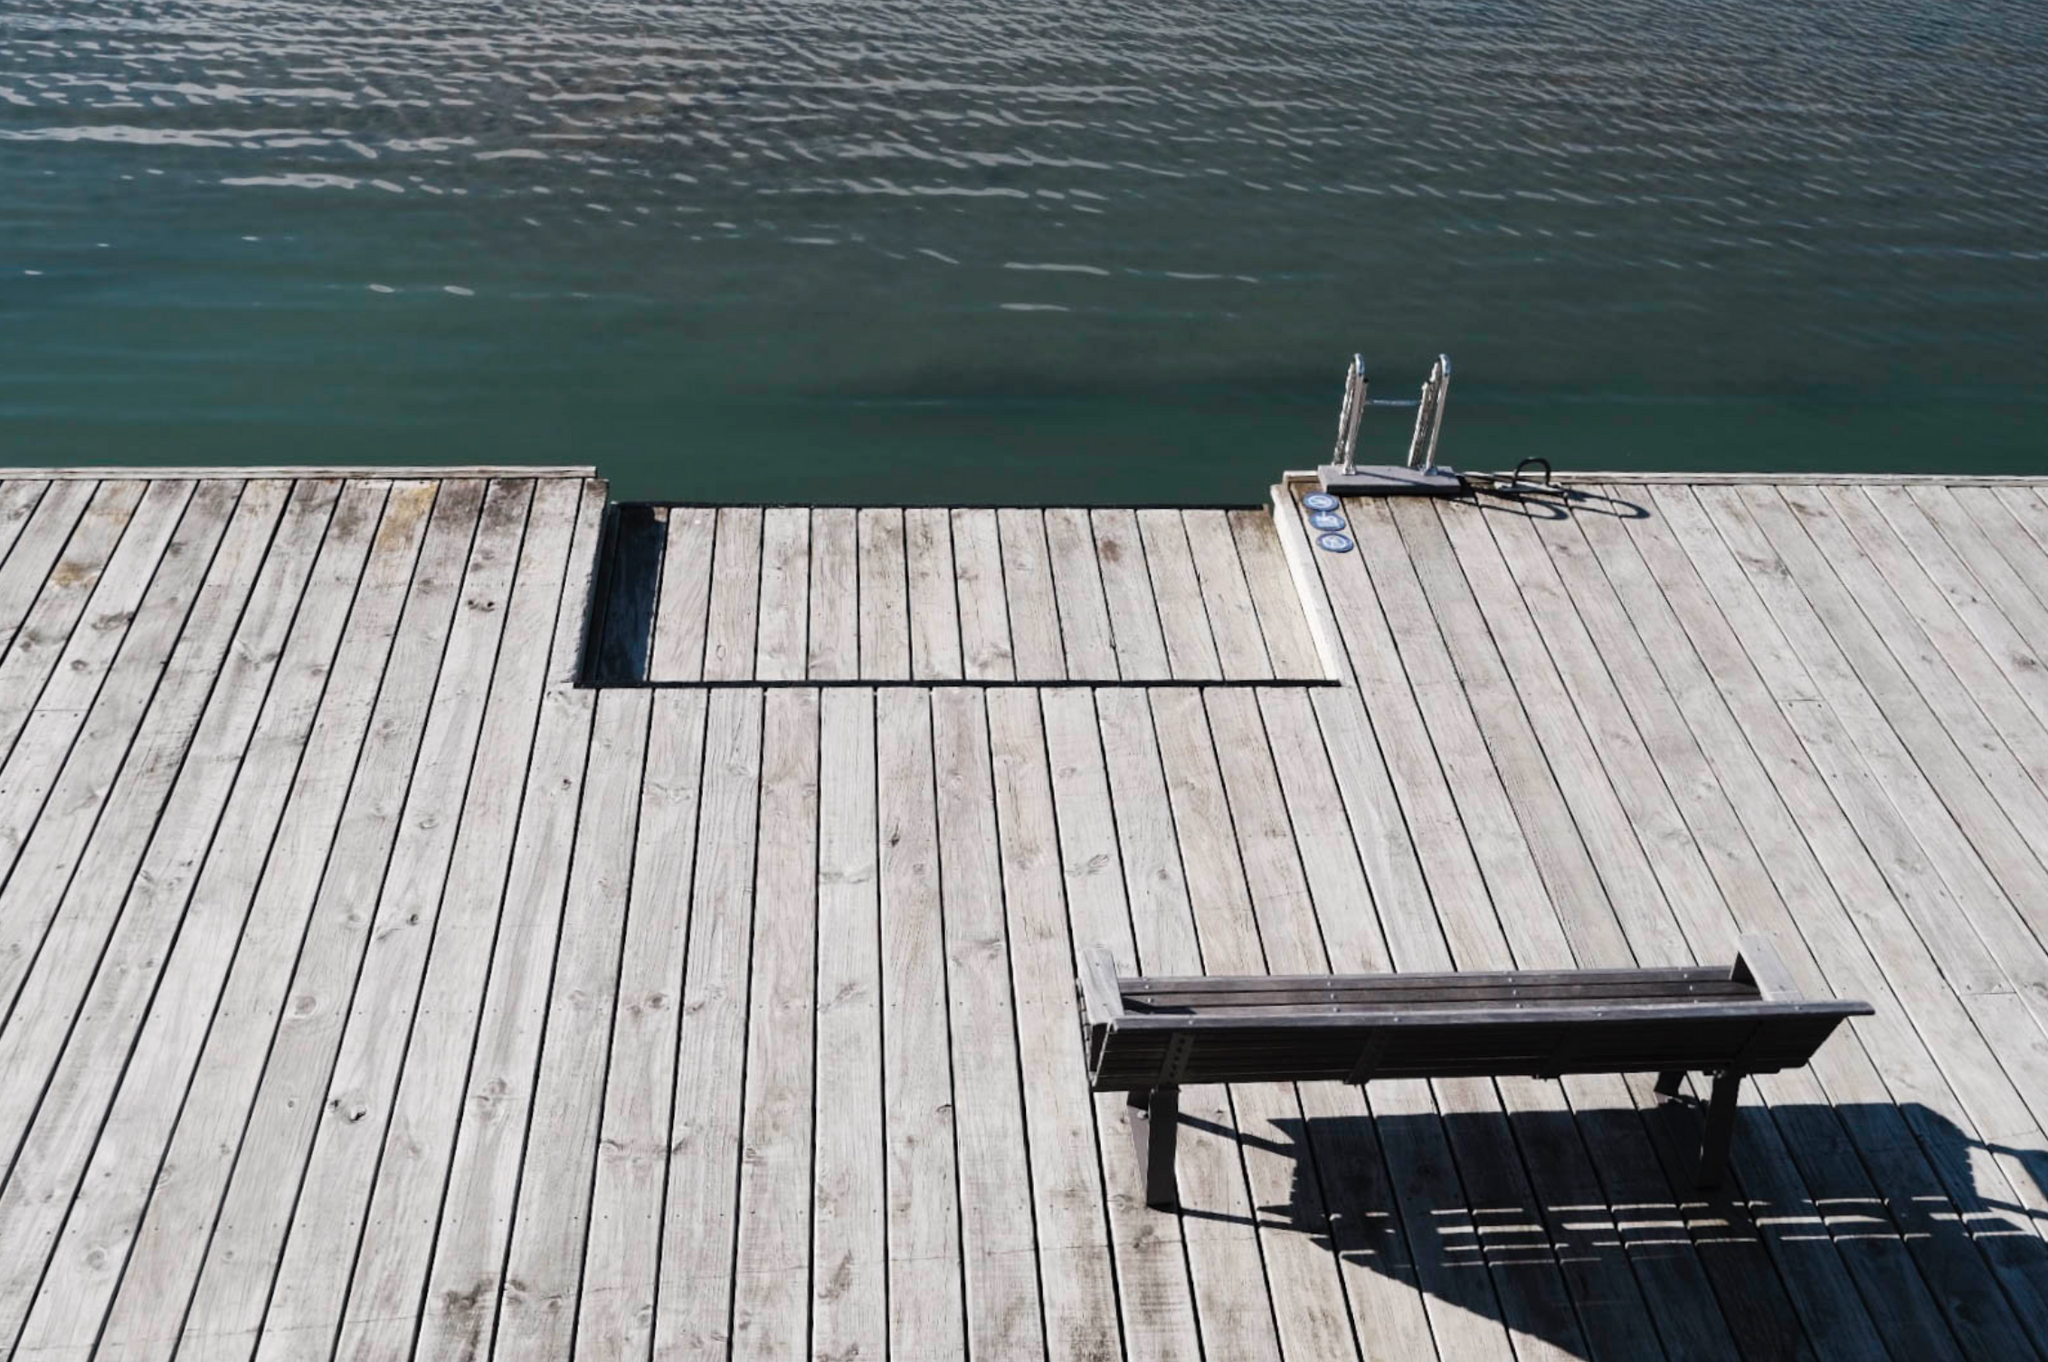 Looking down to a boardwalk at Westhaven Marina. The boardwalk cuts directly across the frame from left to right. There is water in the top half of the image. There sits a picnic bench in the bottom right of the image, with a small ladder to access the harbour from the boardwalk in the top right.